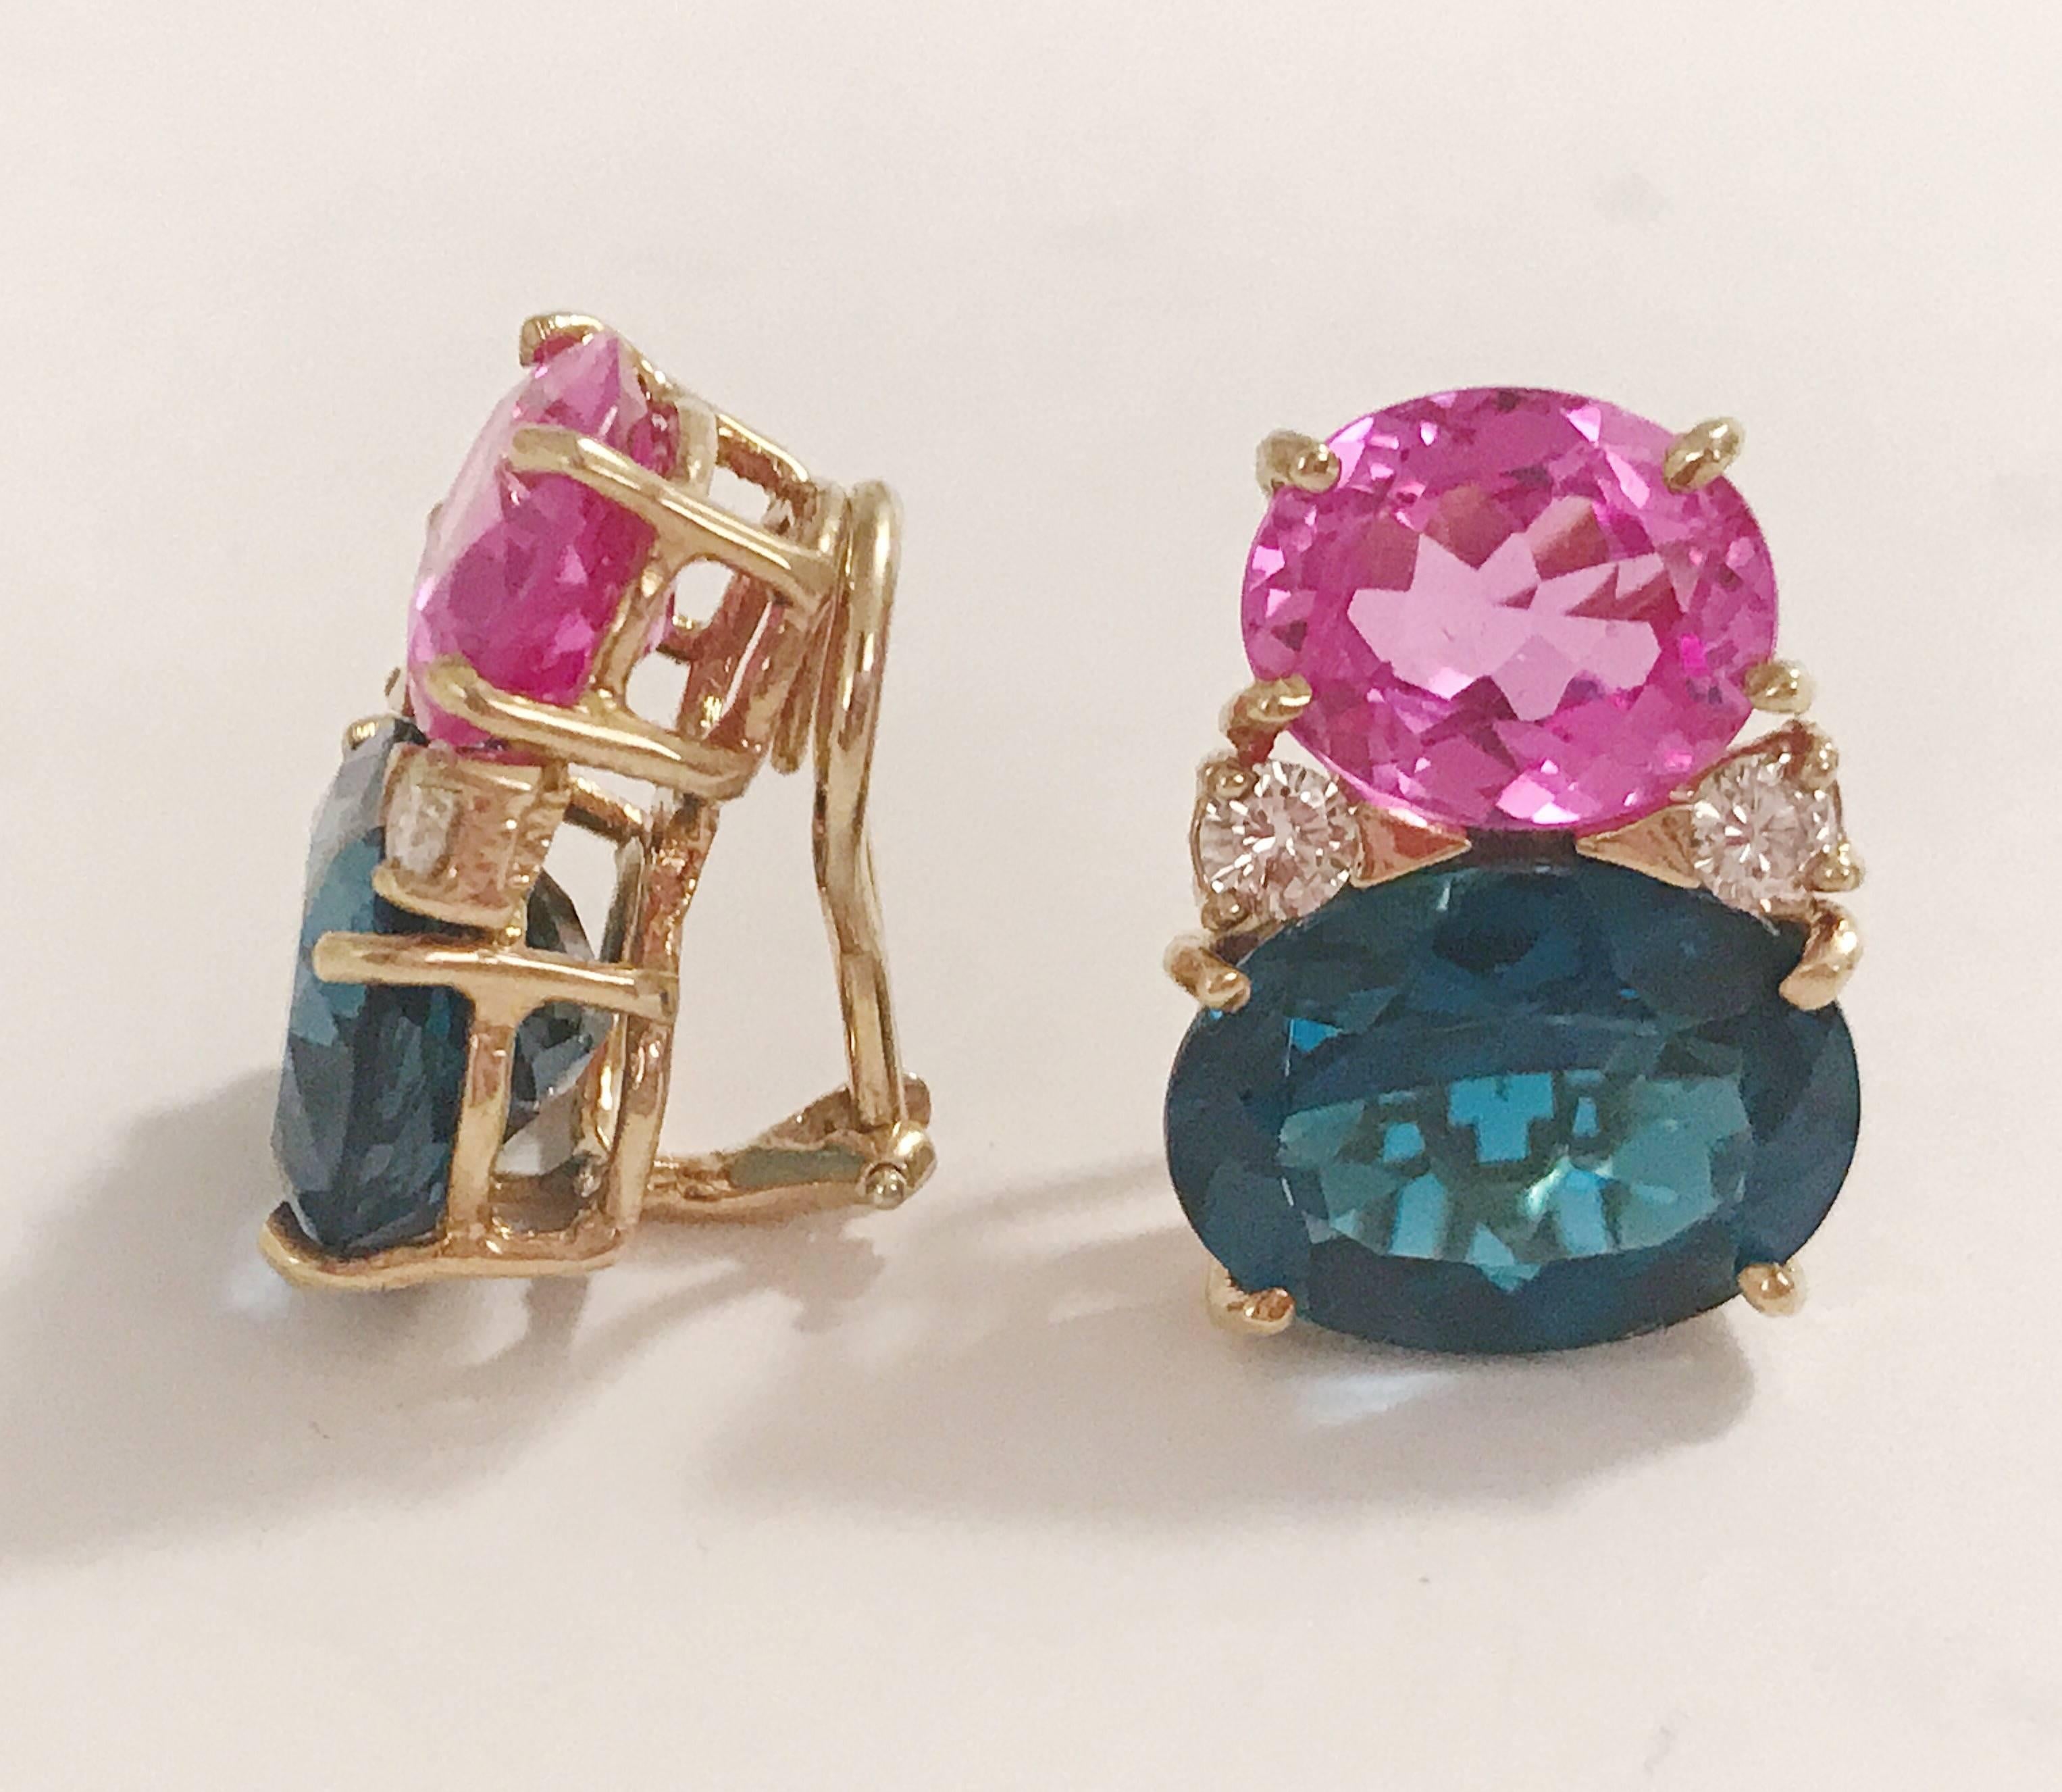 18kt Yellow Gold Large GUM DROP™ Earrings with Hot Pink Topaz and Deep Blue Topaz and Diamonds. The Top oval faceted Pink Topaz is approximately 5 cts each and the Bottom Deep Blue Topaz is approximately 12 cts each, and 4 diamonds weighing